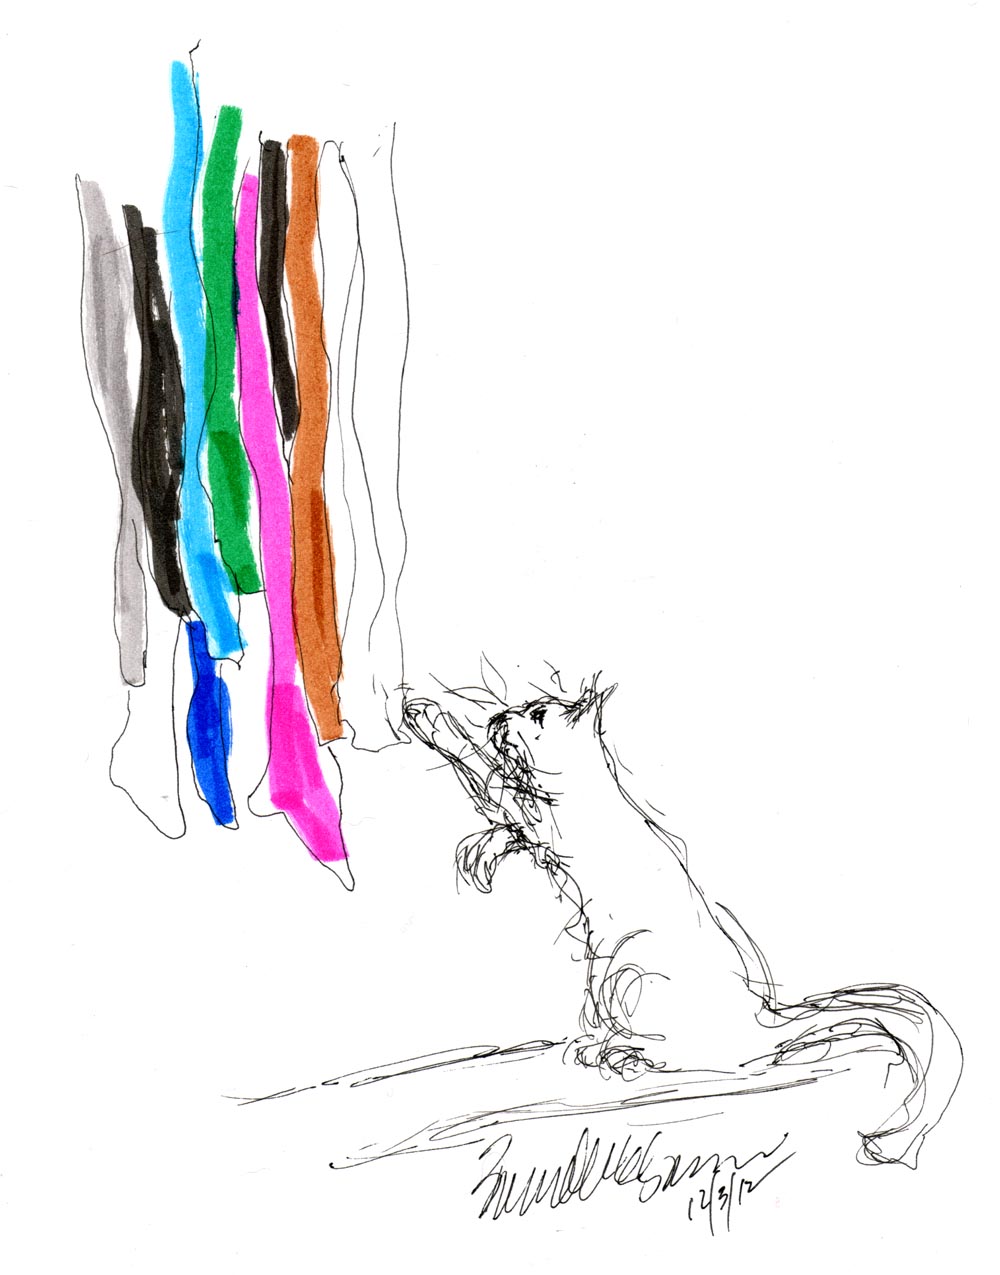 sketch of cat swatting at colored hosiery